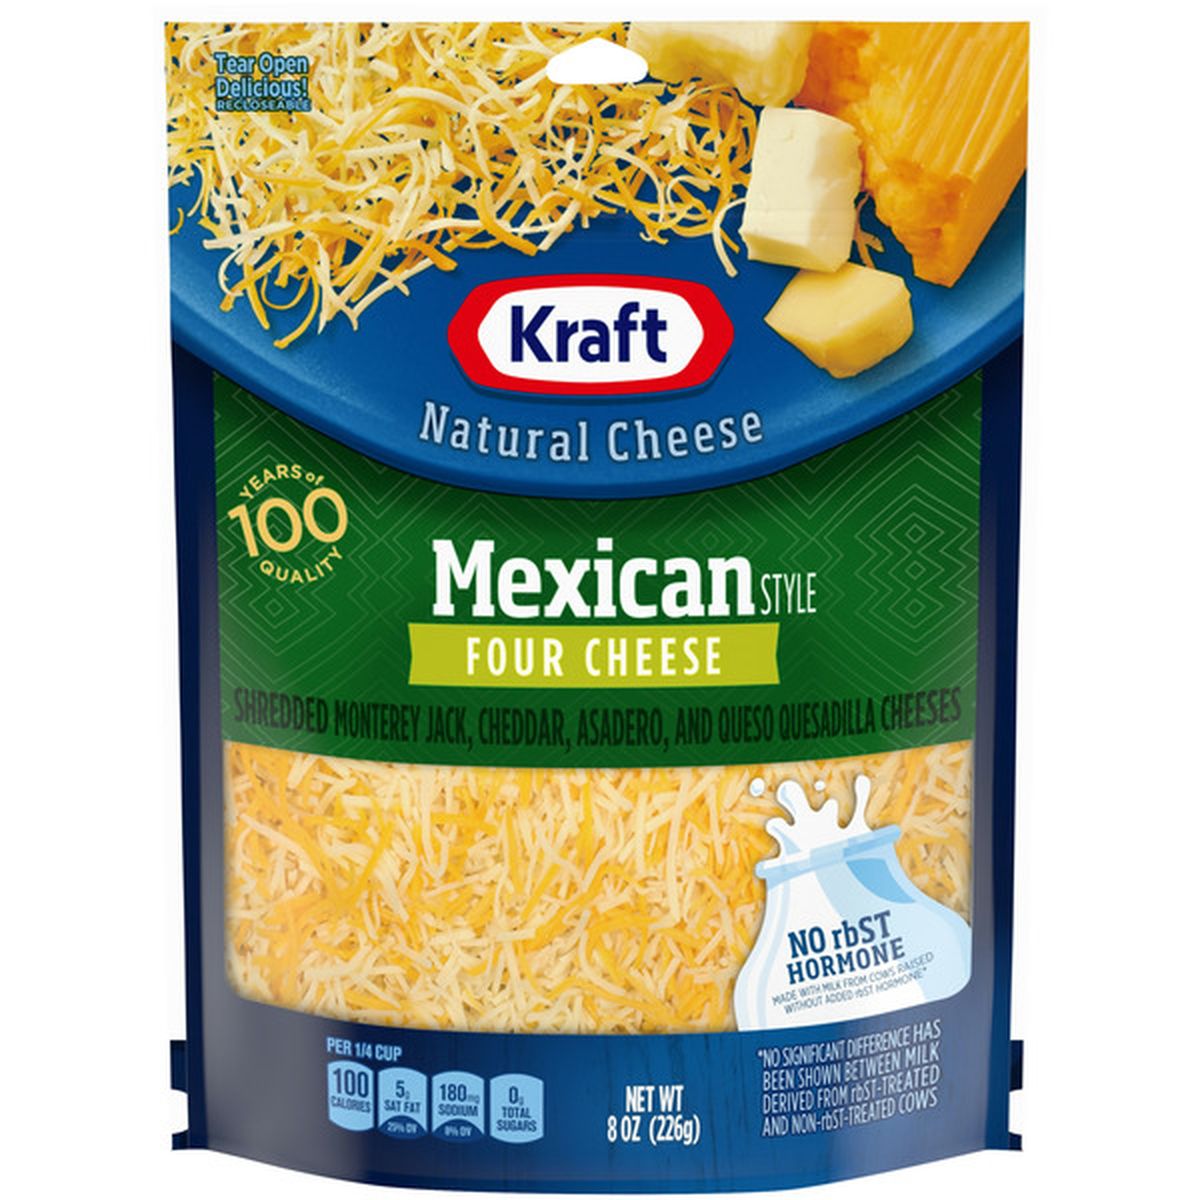 Kraft Mexican Style Four Cheese Blend Shredded Cheese (8 oz